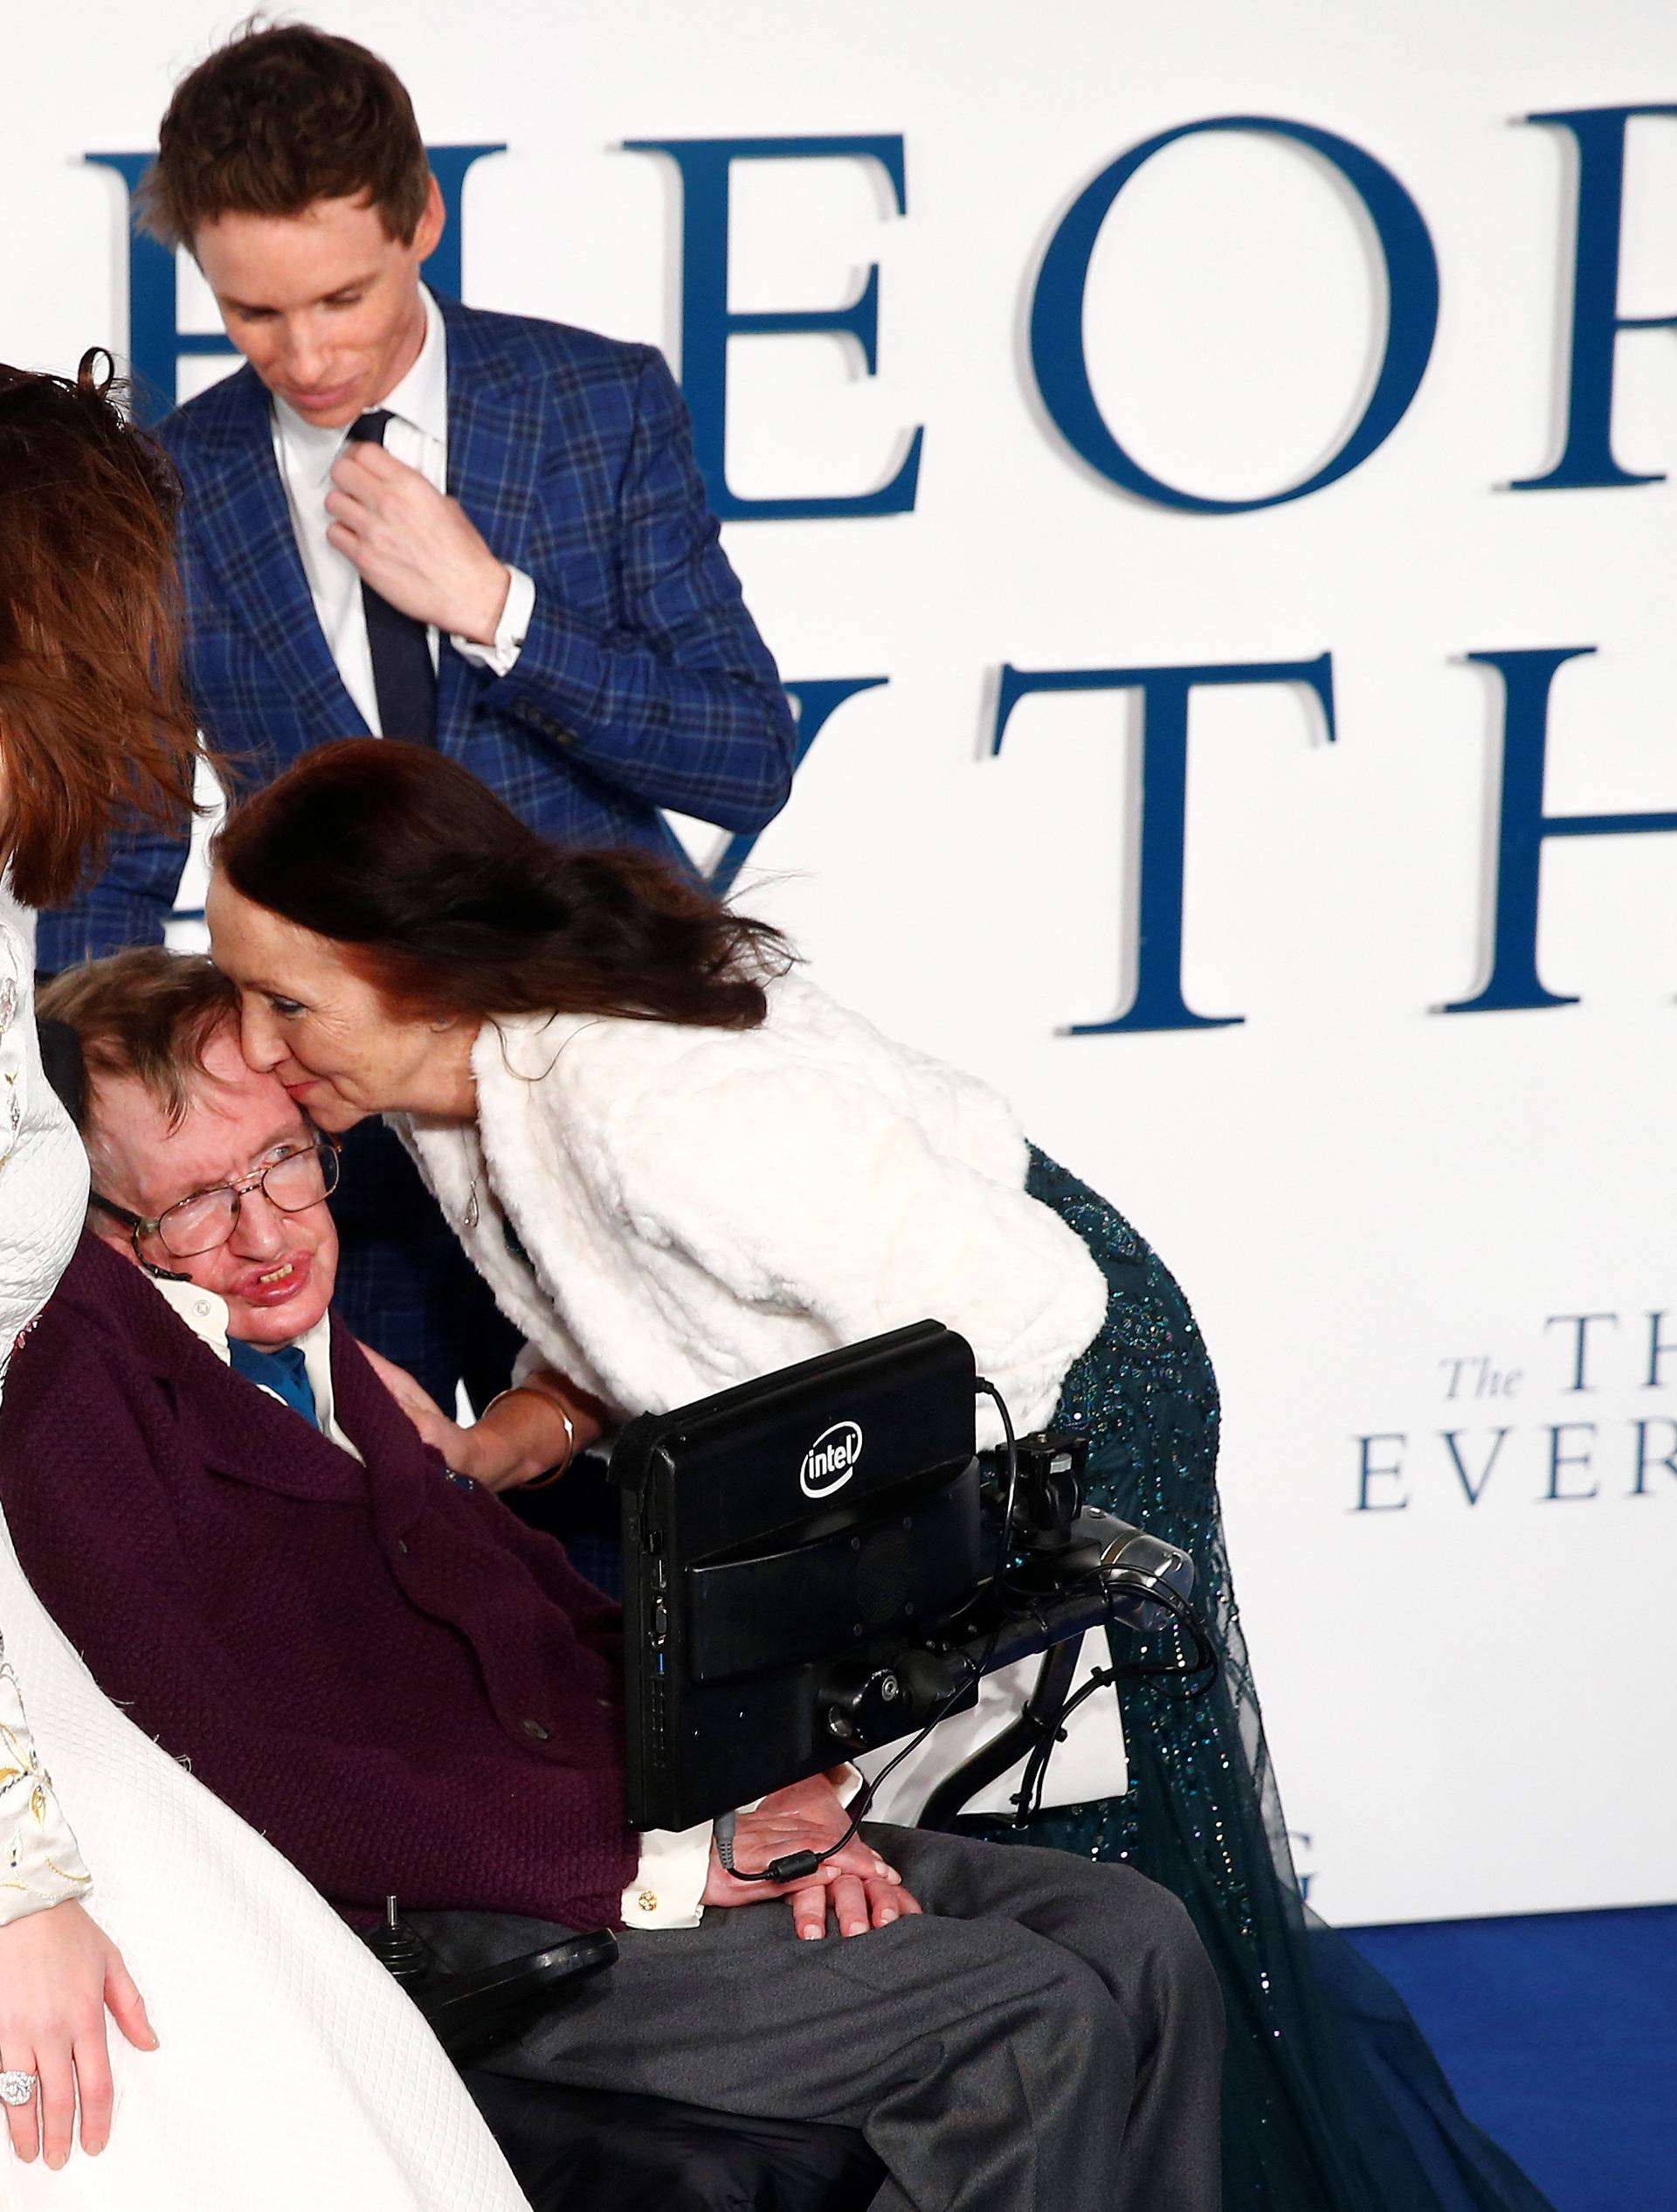 FILE PHOTO: Jane Wilde Hawking kisses her ex-husband Stephen Hawking as she arrives at the UK premiere of the film "The Theory of Everything" at a cinema in central London